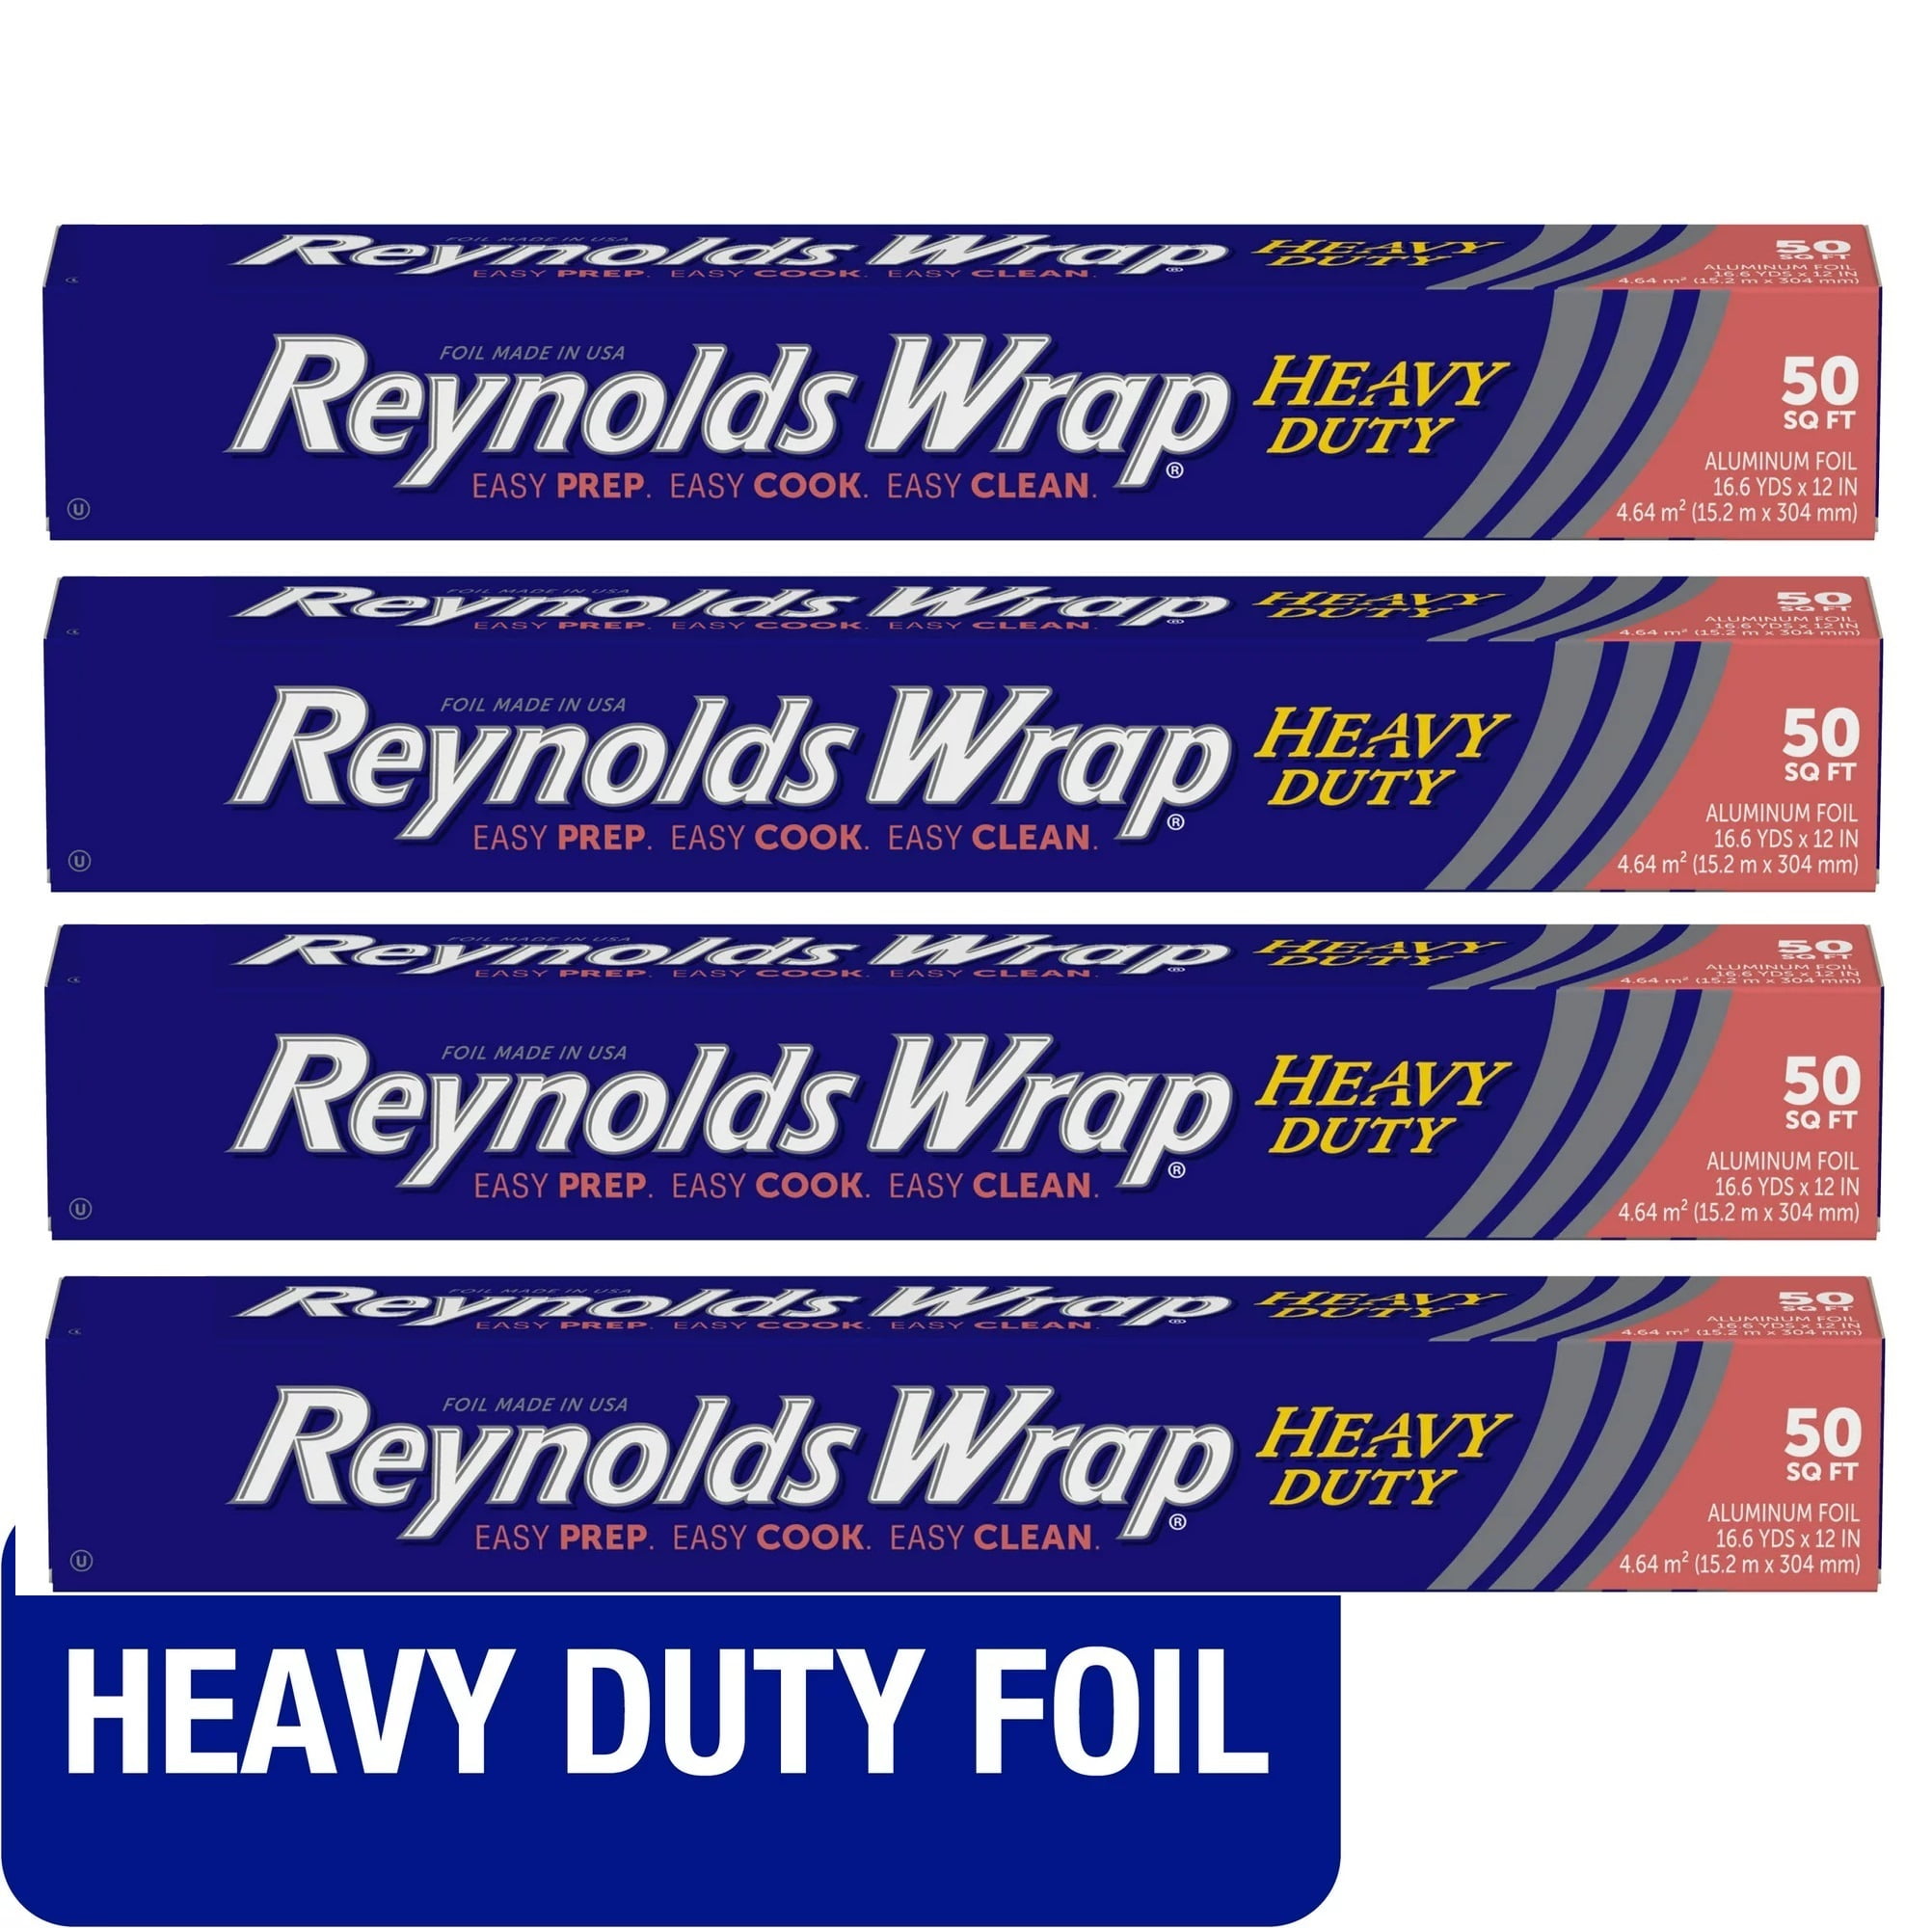 Reynolds Wrap Heavy Duty Aluminum Foil, 50 Square Feet (Packaging May Vary)